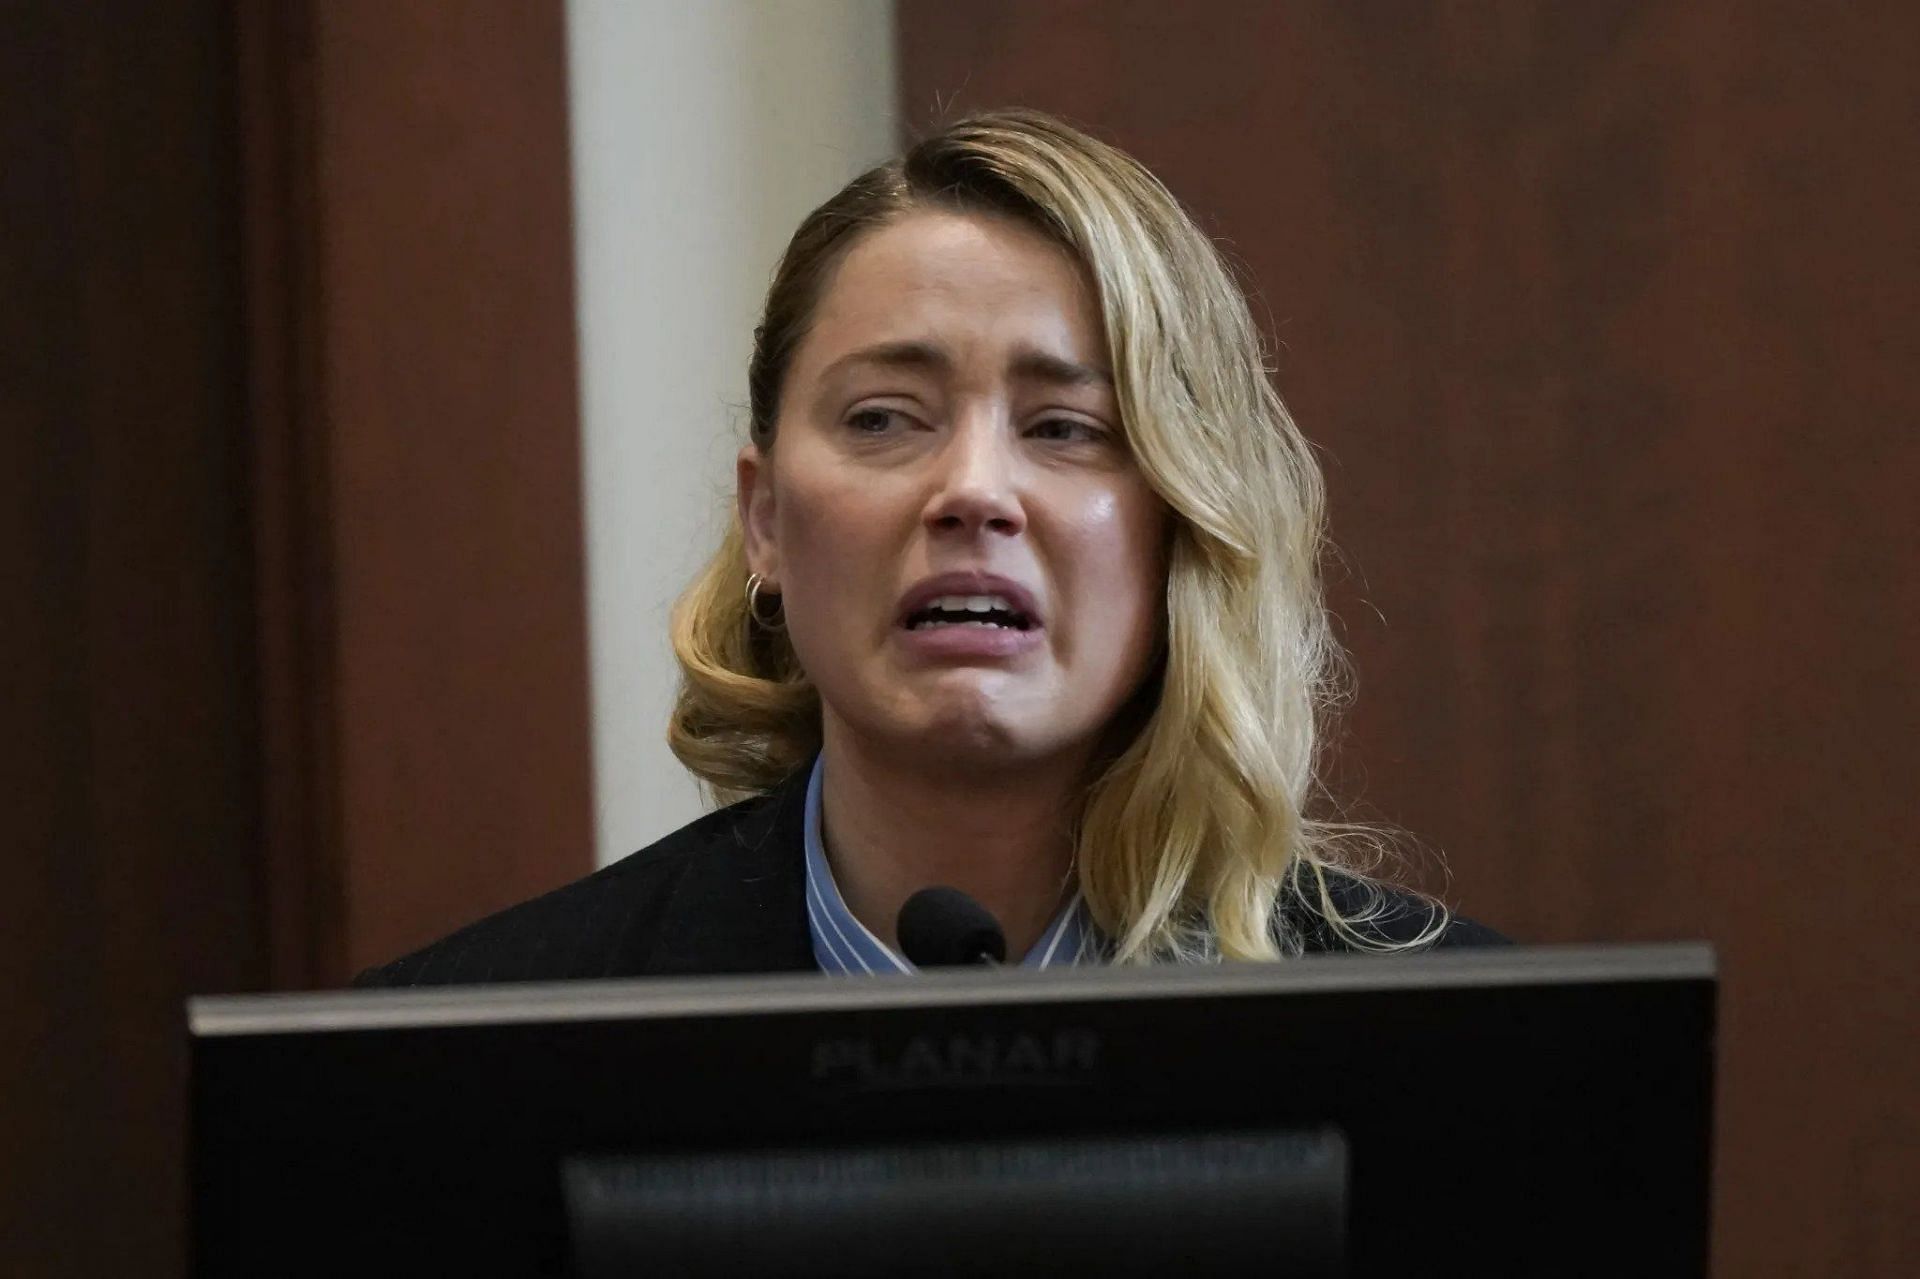 Amber Heard during the trial (Image via Getty)